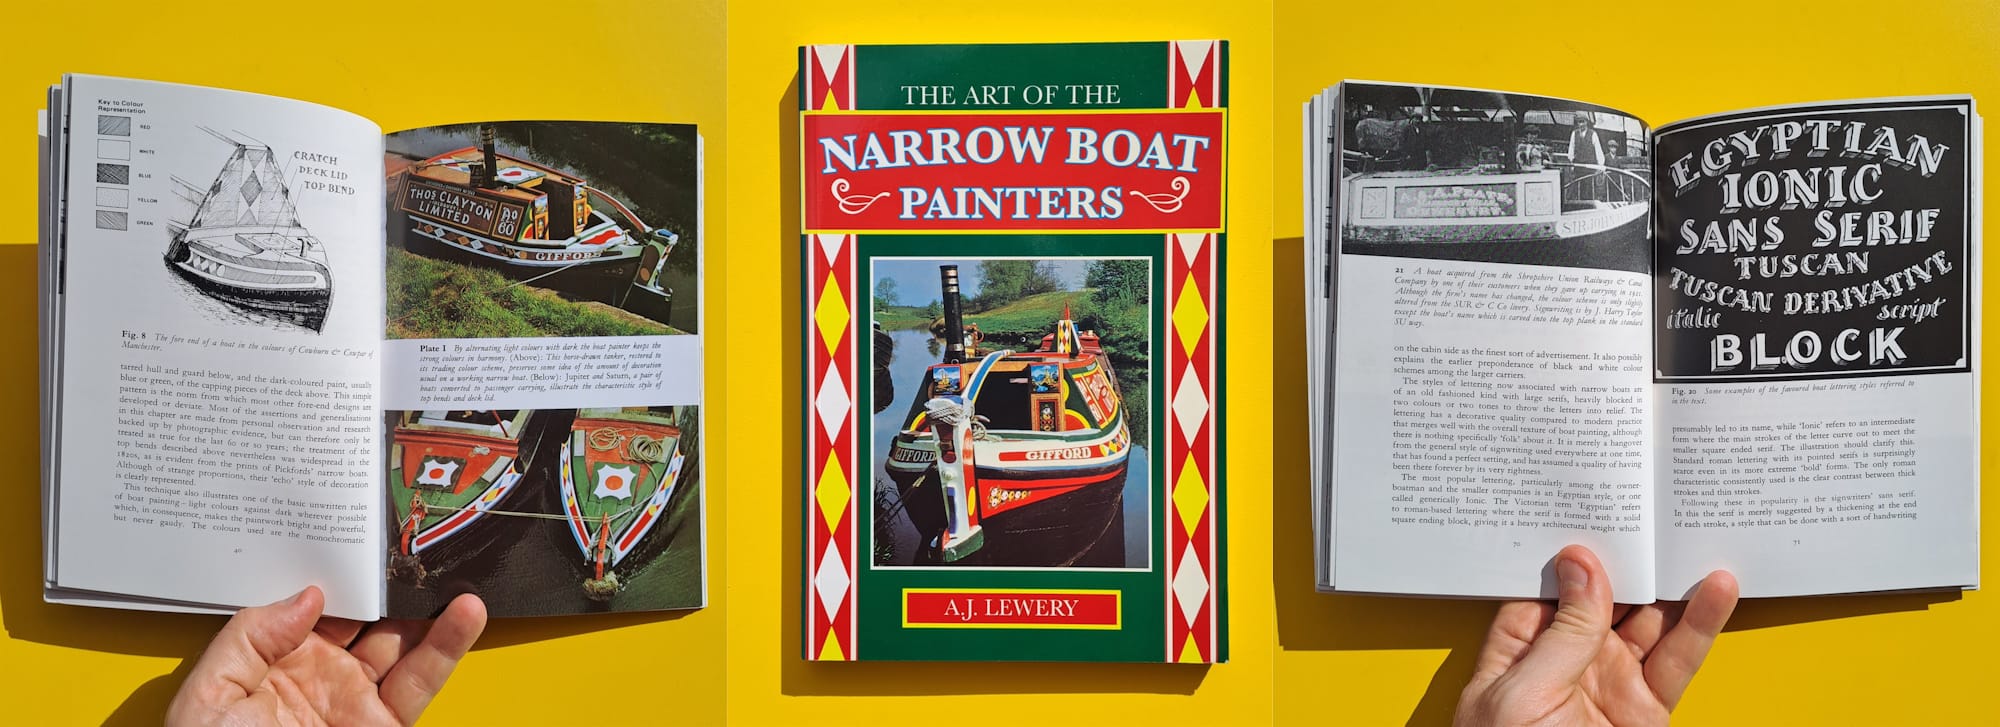 Triptych with the cover of a book in the centre, flanked by spreads made visible by a hand opening the book up. Each shows various elements of decoration and lettering on canal boats.